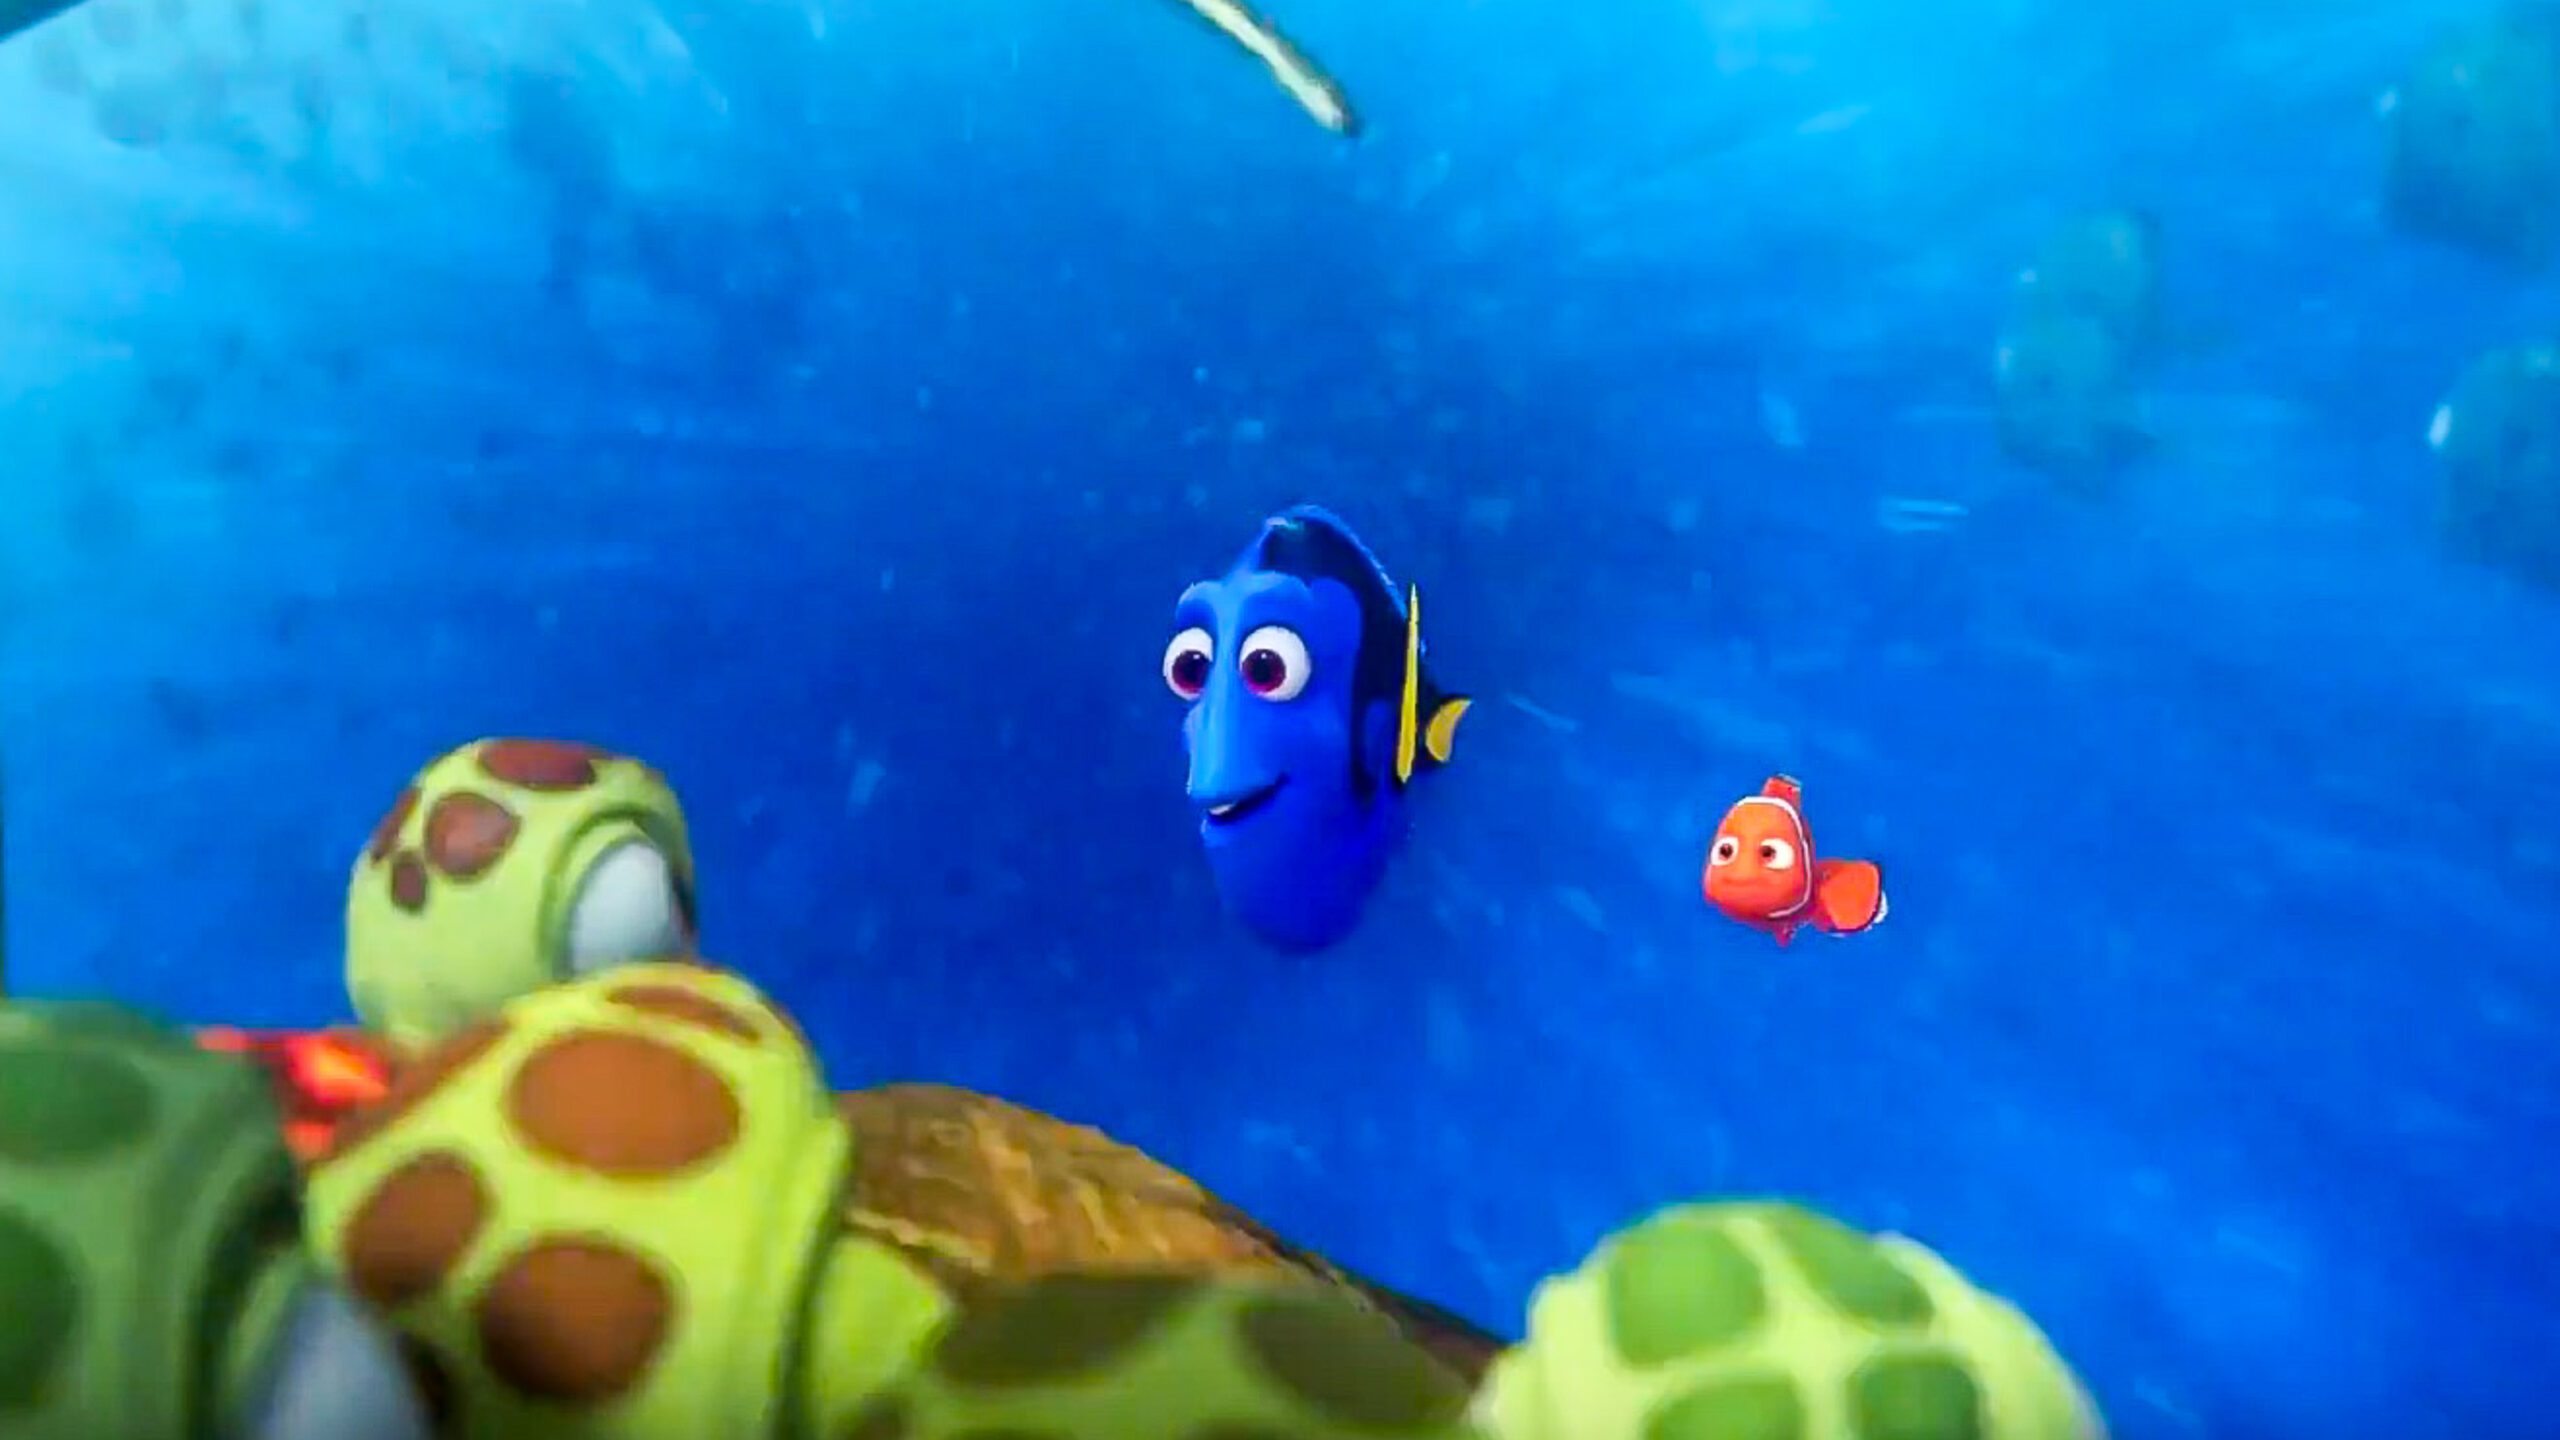 WATCH: Squirt, Crush are back in new ‘Finding Dory’ clip